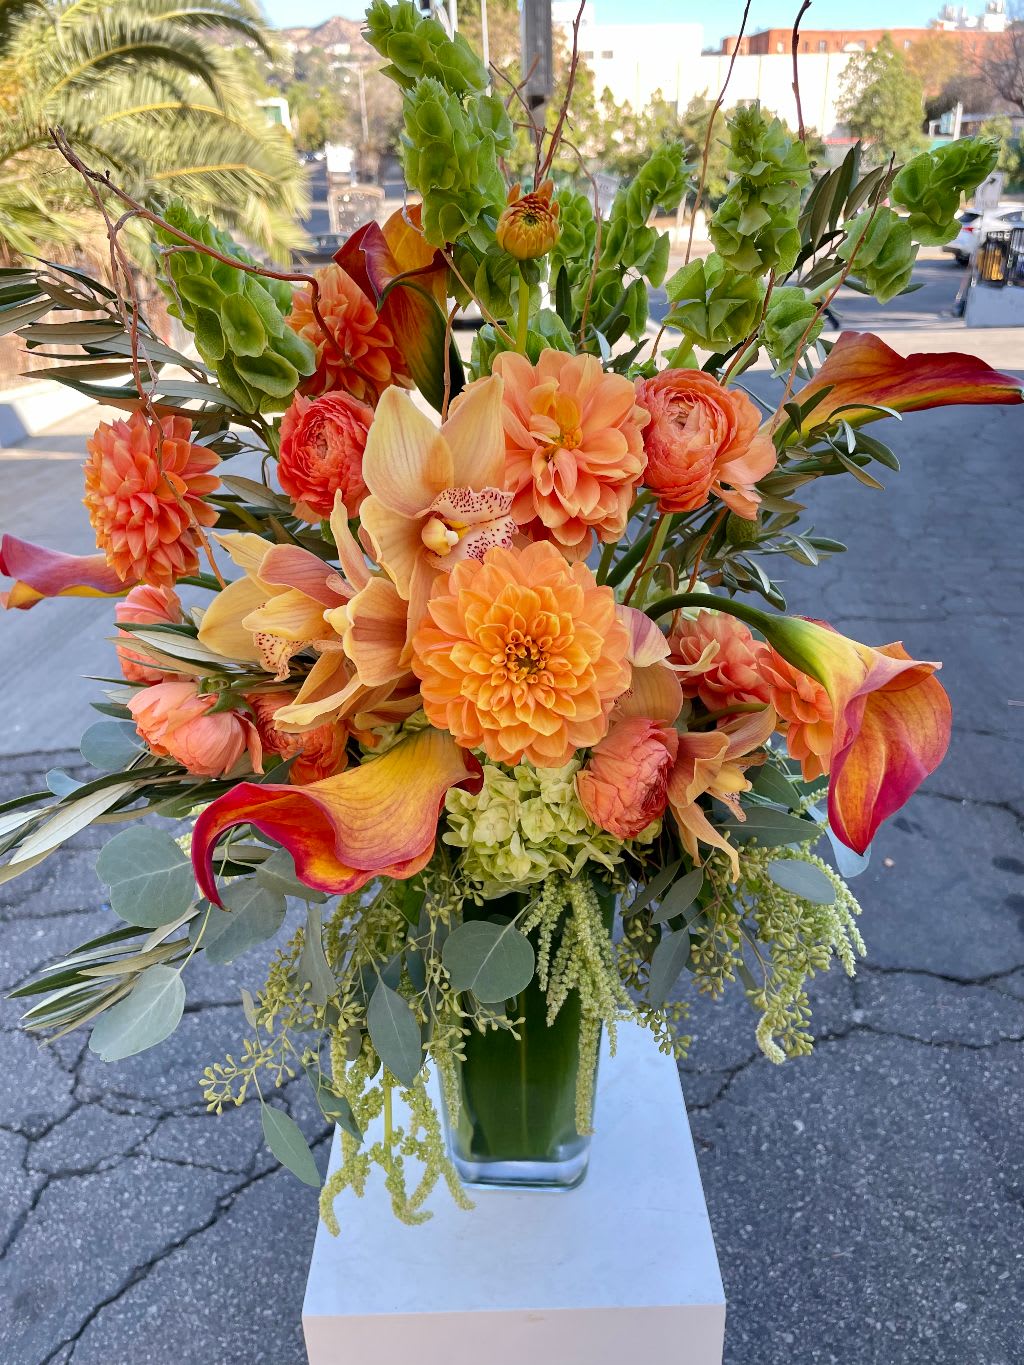 California  Sunset - Welcoming the fall with rich tones of Orange Calla lilies, Orchids, Proteas Burgundy hanging Amaranthus and more.  This bouquet is the perfect way to celebrate the arrival of fall. The rich tones of orange, burgundy, and purple are reminiscent of the changing leaves and the cozy feeling of the season.  Orange calla lilies represent joy, happiness, and new beginnings. They are also associated with the fall season, as they are often in bloom during this time of year.  Orchids are a symbol of elegance, beauty, and luxury. They come in a variety of colors, including orange, burgundy, and purple.  Proteas are a type of flower that is native to South Africa. They are known for their unique and exotic appearance. Proteas represent courage, strength, and transformation.  Burgundy hanging amaranthus is a type of flower that is known for its long, hanging stems. It is often used in dried flower arrangements. Burgundy hanging amaranthus represents love, passion, and immortality.  Together, these flowers create a bouquet that is both beautiful and meaningful. It is the perfect way to celebrate the fall season and to show someone how much you care about them.  Here are some ideas for how to present this bouquet to your loved one:  Give it to them as a surprise gift. Leave it on their pillow when they go to bed. Bring it to them at work. Place it in a vase in their favorite room. Use it as a centerpiece for a fall gathering. No matter how you choose to present it, this bouquet is sure to be a hit.  Visit Dave's Flowers online or in-store in Los Angeles to discover this breathtaking fall bouquet and explore our wide selection of seasonal arrangements. We offer convenient flower delivery in Los Angeles to ensure your floral masterpiece arrives fresh and ready to bring autumn's beauty into your life.